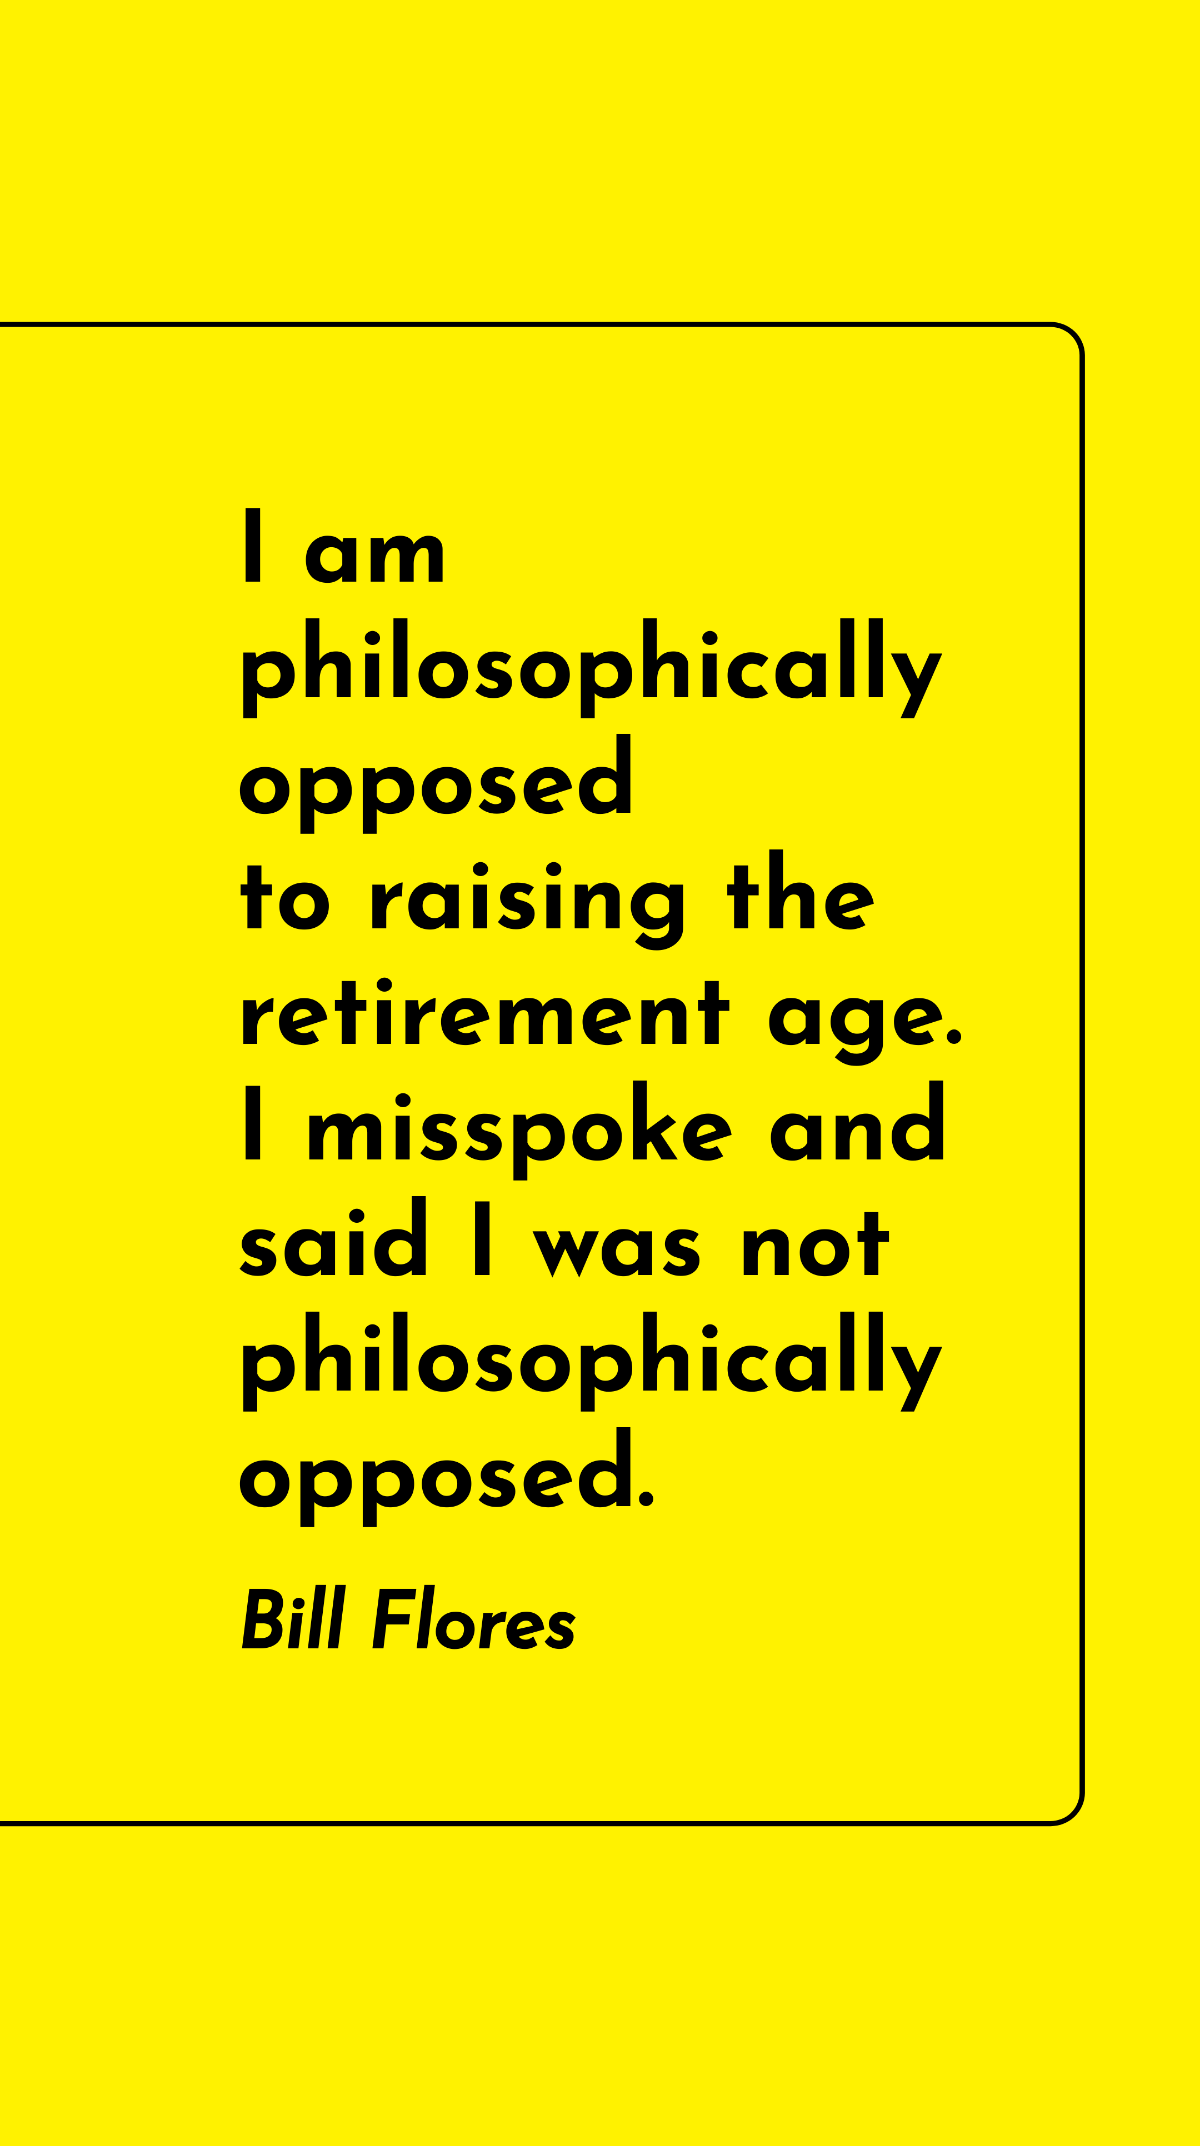 Bill Flores - I am philosophically opposed to raising the retirement age. I misspoke and said I was not philosophically opposed. Template